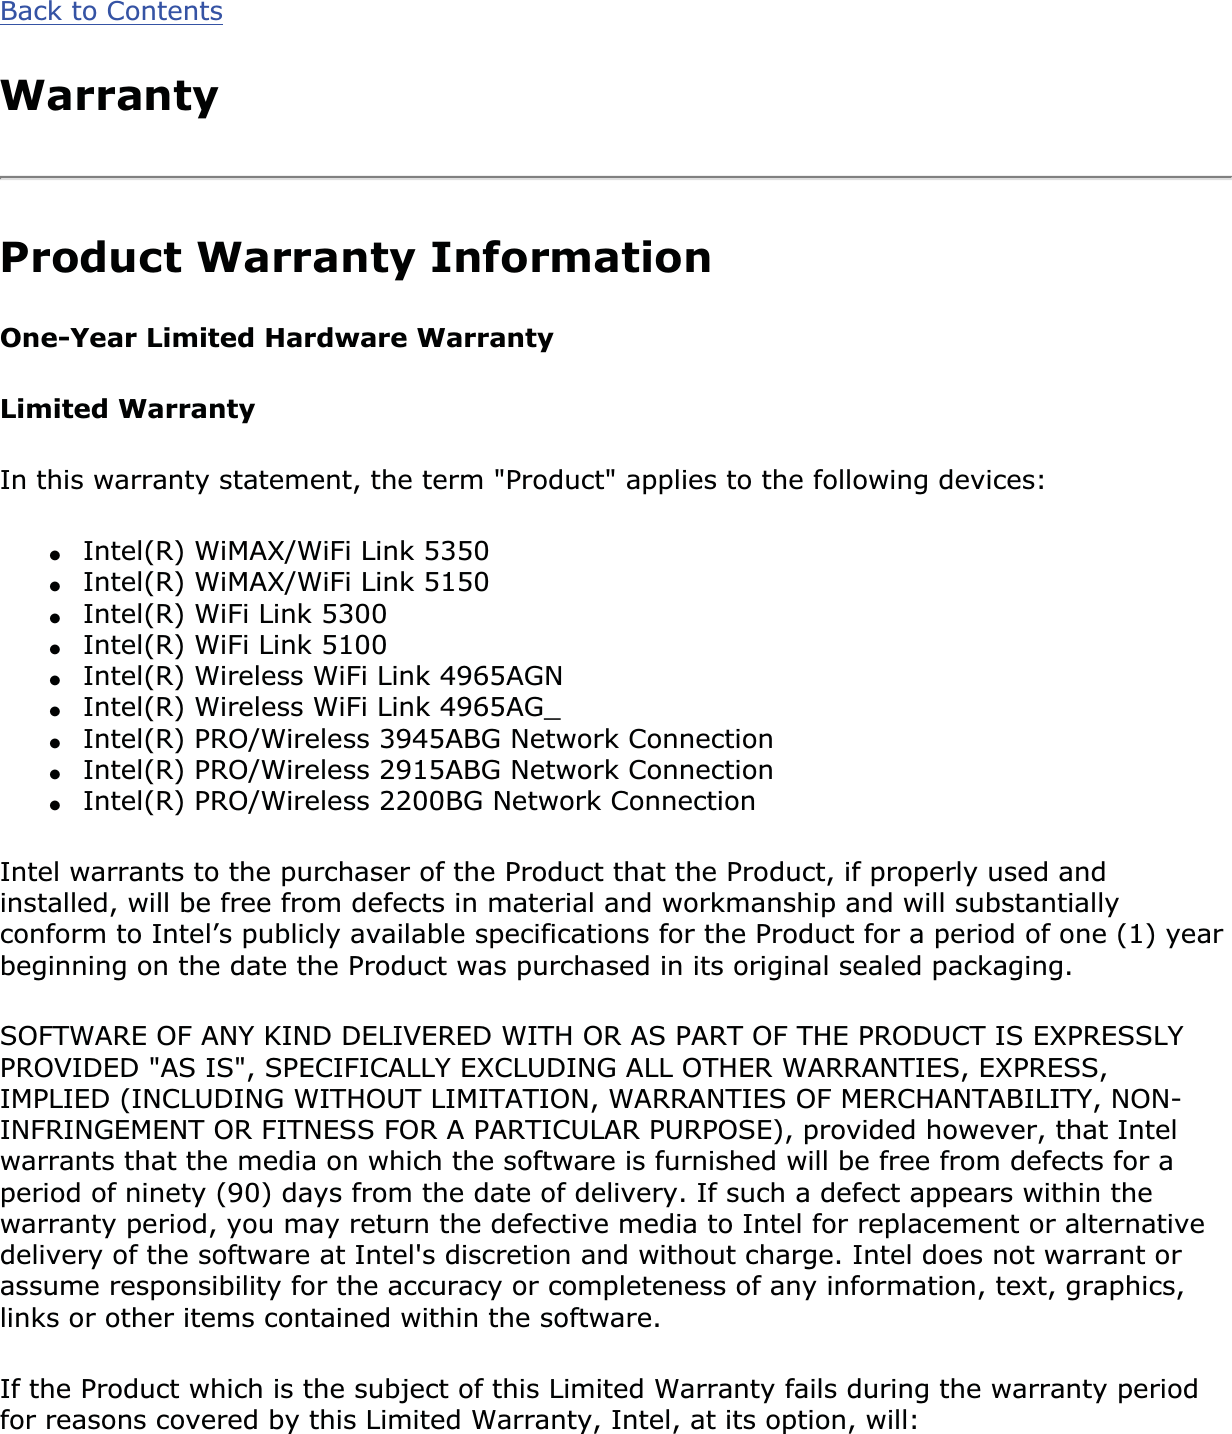 Back to ContentsWarrantyProduct Warranty InformationOne-Year Limited Hardware WarrantyLimited WarrantyIn this warranty statement, the term &quot;Product&quot; applies to the following devices:●Intel(R) WiMAX/WiFi Link 5350●Intel(R) WiMAX/WiFi Link 5150●Intel(R) WiFi Link 5300●Intel(R) WiFi Link 5100 ●Intel(R) Wireless WiFi Link 4965AGN●Intel(R) Wireless WiFi Link 4965AG_●Intel(R) PRO/Wireless 3945ABG Network Connection●Intel(R) PRO/Wireless 2915ABG Network Connection●Intel(R) PRO/Wireless 2200BG Network ConnectionIntel warrants to the purchaser of the Product that the Product, if properly used and installed, will be free from defects in material and workmanship and will substantially conform to Intel’s publicly available specifications for the Product for a period of one (1) year beginning on the date the Product was purchased in its original sealed packaging.SOFTWARE OF ANY KIND DELIVERED WITH OR AS PART OF THE PRODUCT IS EXPRESSLY PROVIDED &quot;AS IS&quot;, SPECIFICALLY EXCLUDING ALL OTHER WARRANTIES, EXPRESS, IMPLIED (INCLUDING WITHOUT LIMITATION, WARRANTIES OF MERCHANTABILITY, NON-INFRINGEMENT OR FITNESS FOR A PARTICULAR PURPOSE), provided however, that Intel warrants that the media on which the software is furnished will be free from defects for a period of ninety (90) days from the date of delivery. If such a defect appears within the warranty period, you may return the defective media to Intel for replacement or alternative delivery of the software at Intel&apos;s discretion and without charge. Intel does not warrant or assume responsibility for the accuracy or completeness of any information, text, graphics, links or other items contained within the software.If the Product which is the subject of this Limited Warranty fails during the warranty period for reasons covered by this Limited Warranty, Intel, at its option, will: